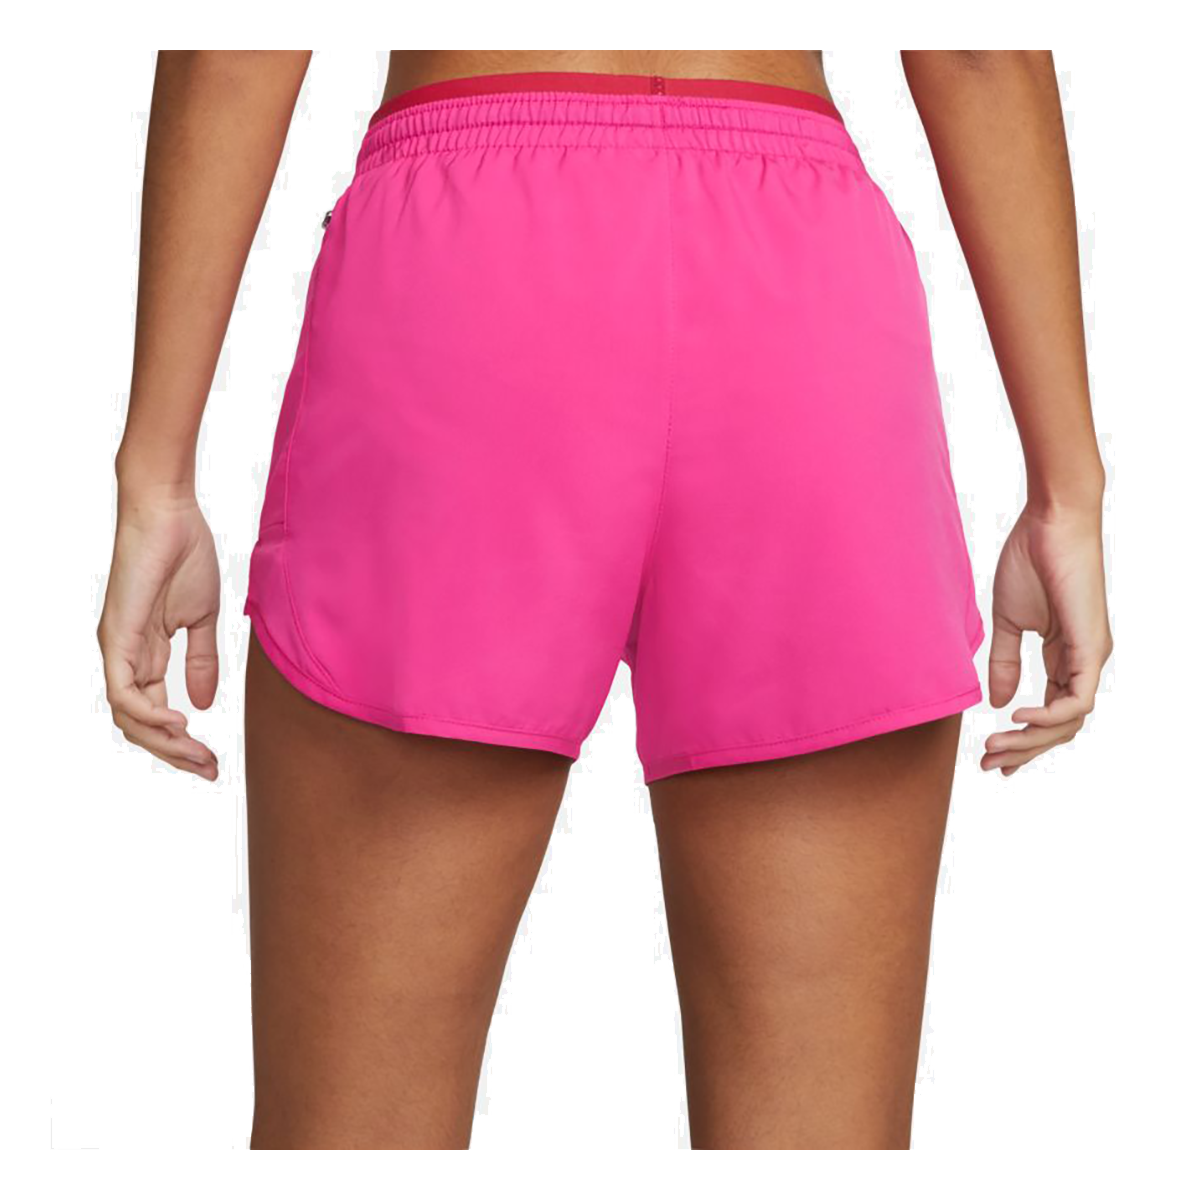 Nike Tempo Luxe 3" Shorts, , large image number null